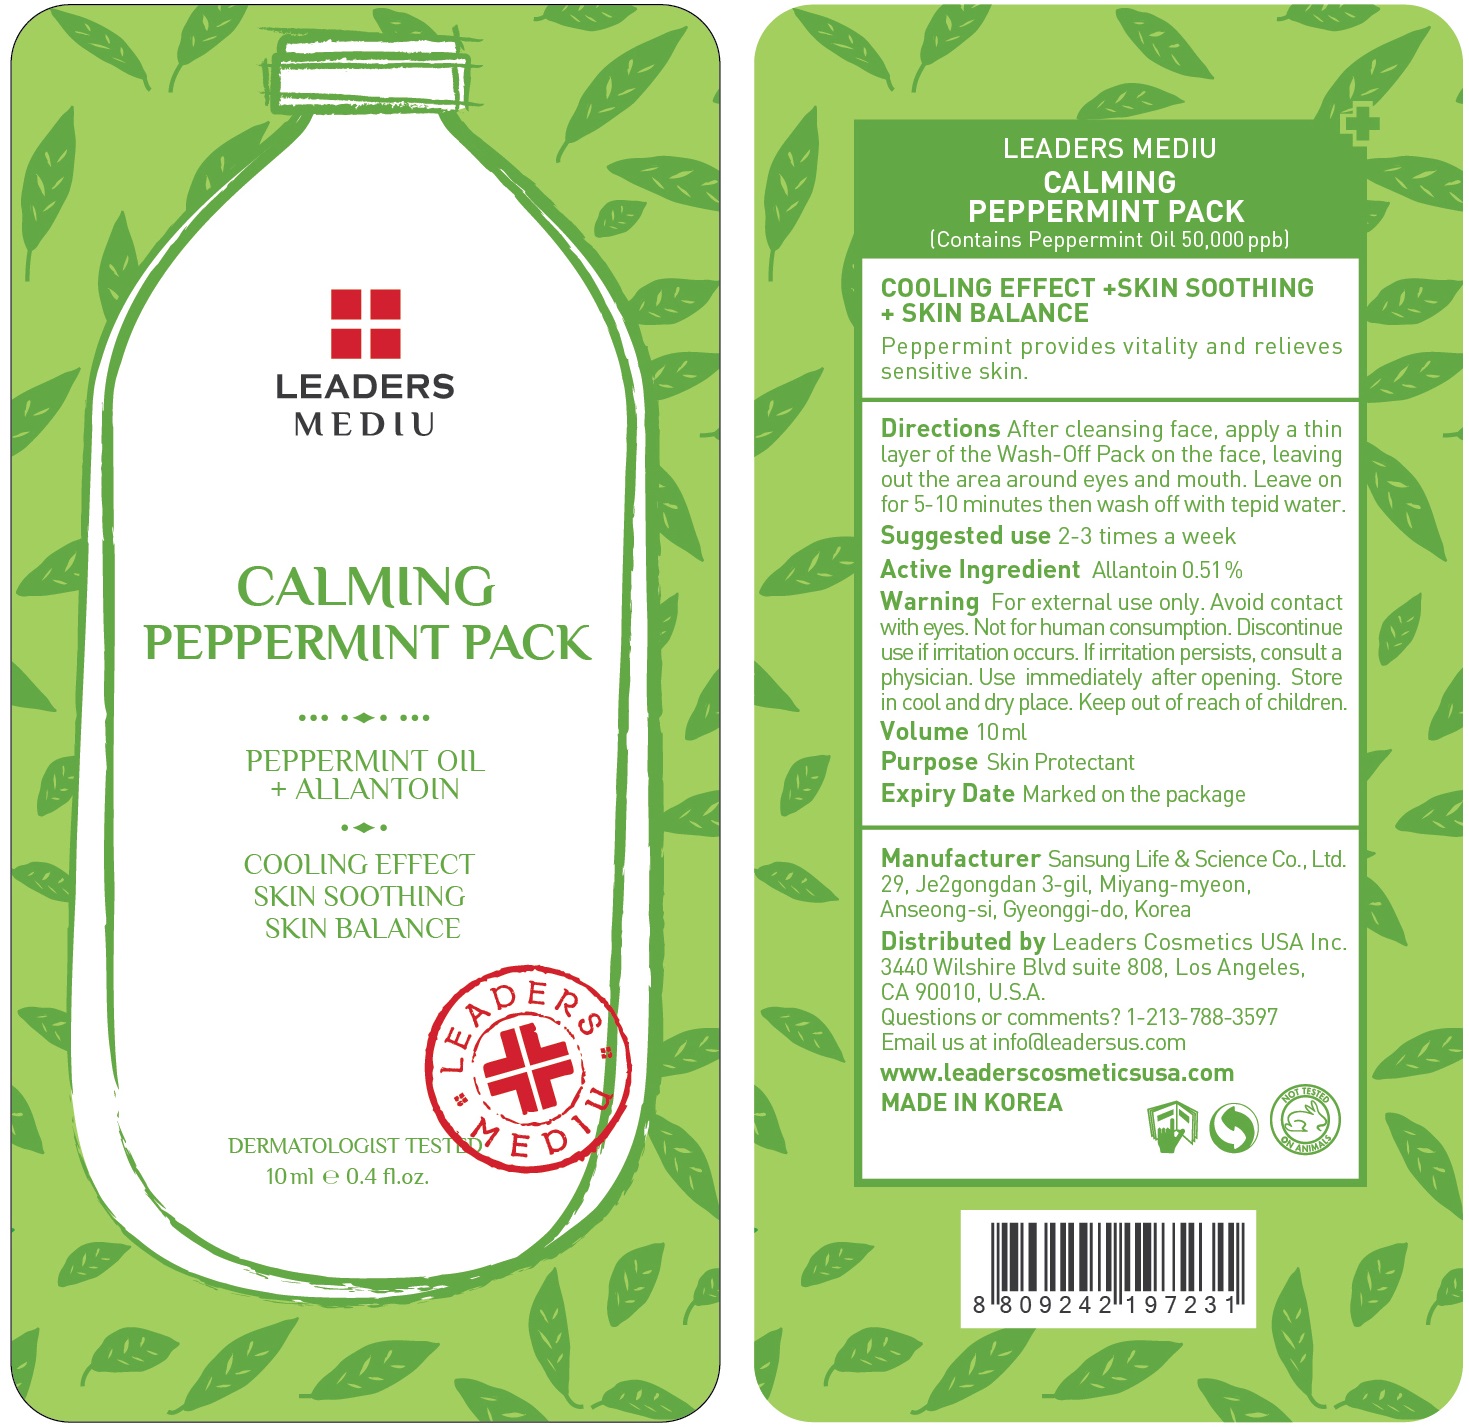 Image of cello pack